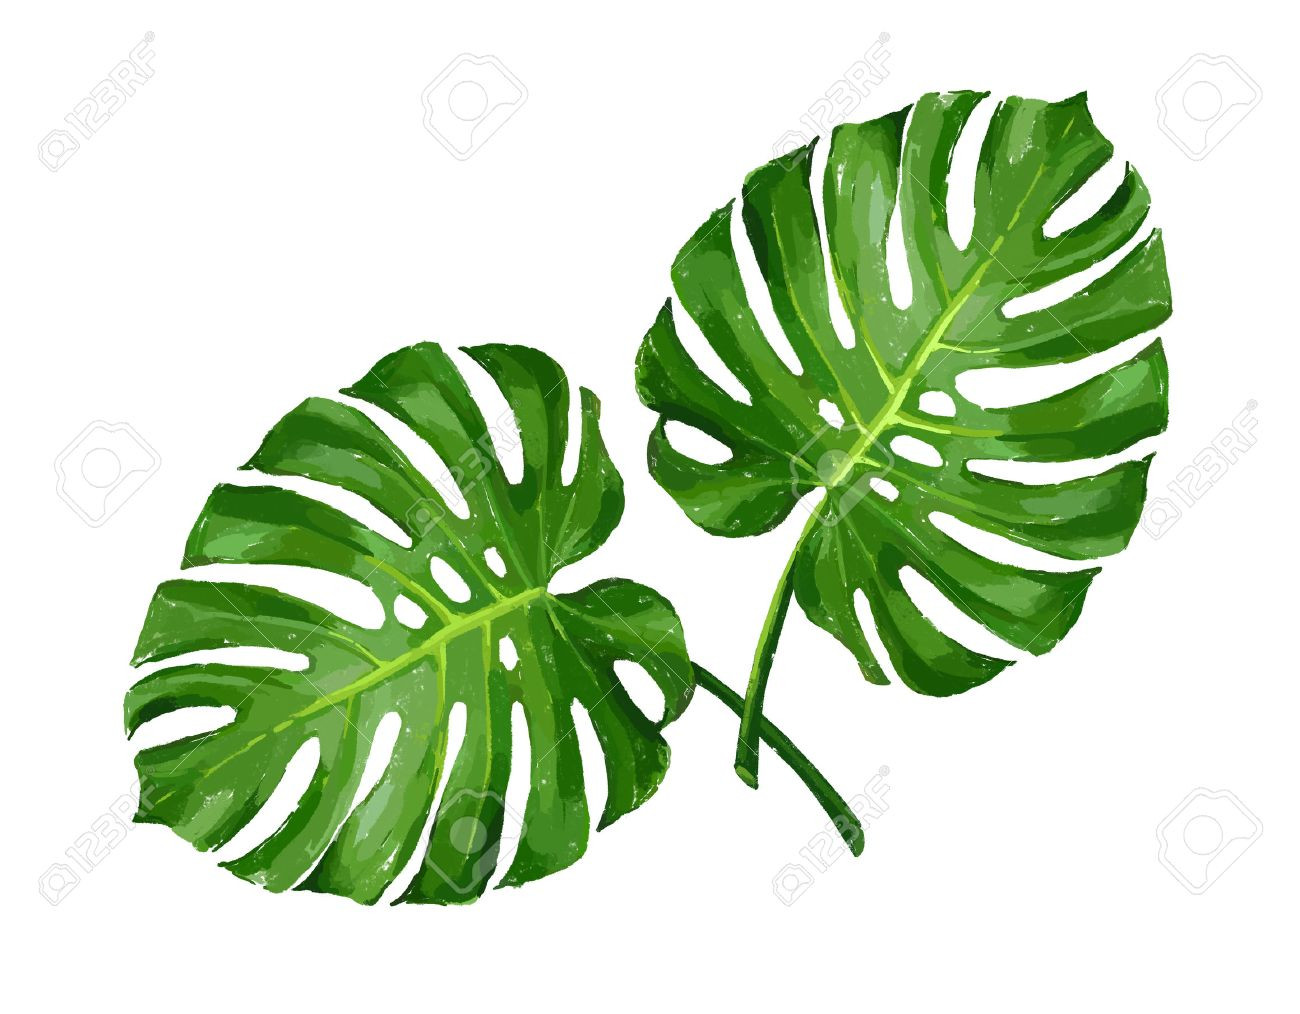 Palm Tree Leaves Clipart at GetDrawings.com.